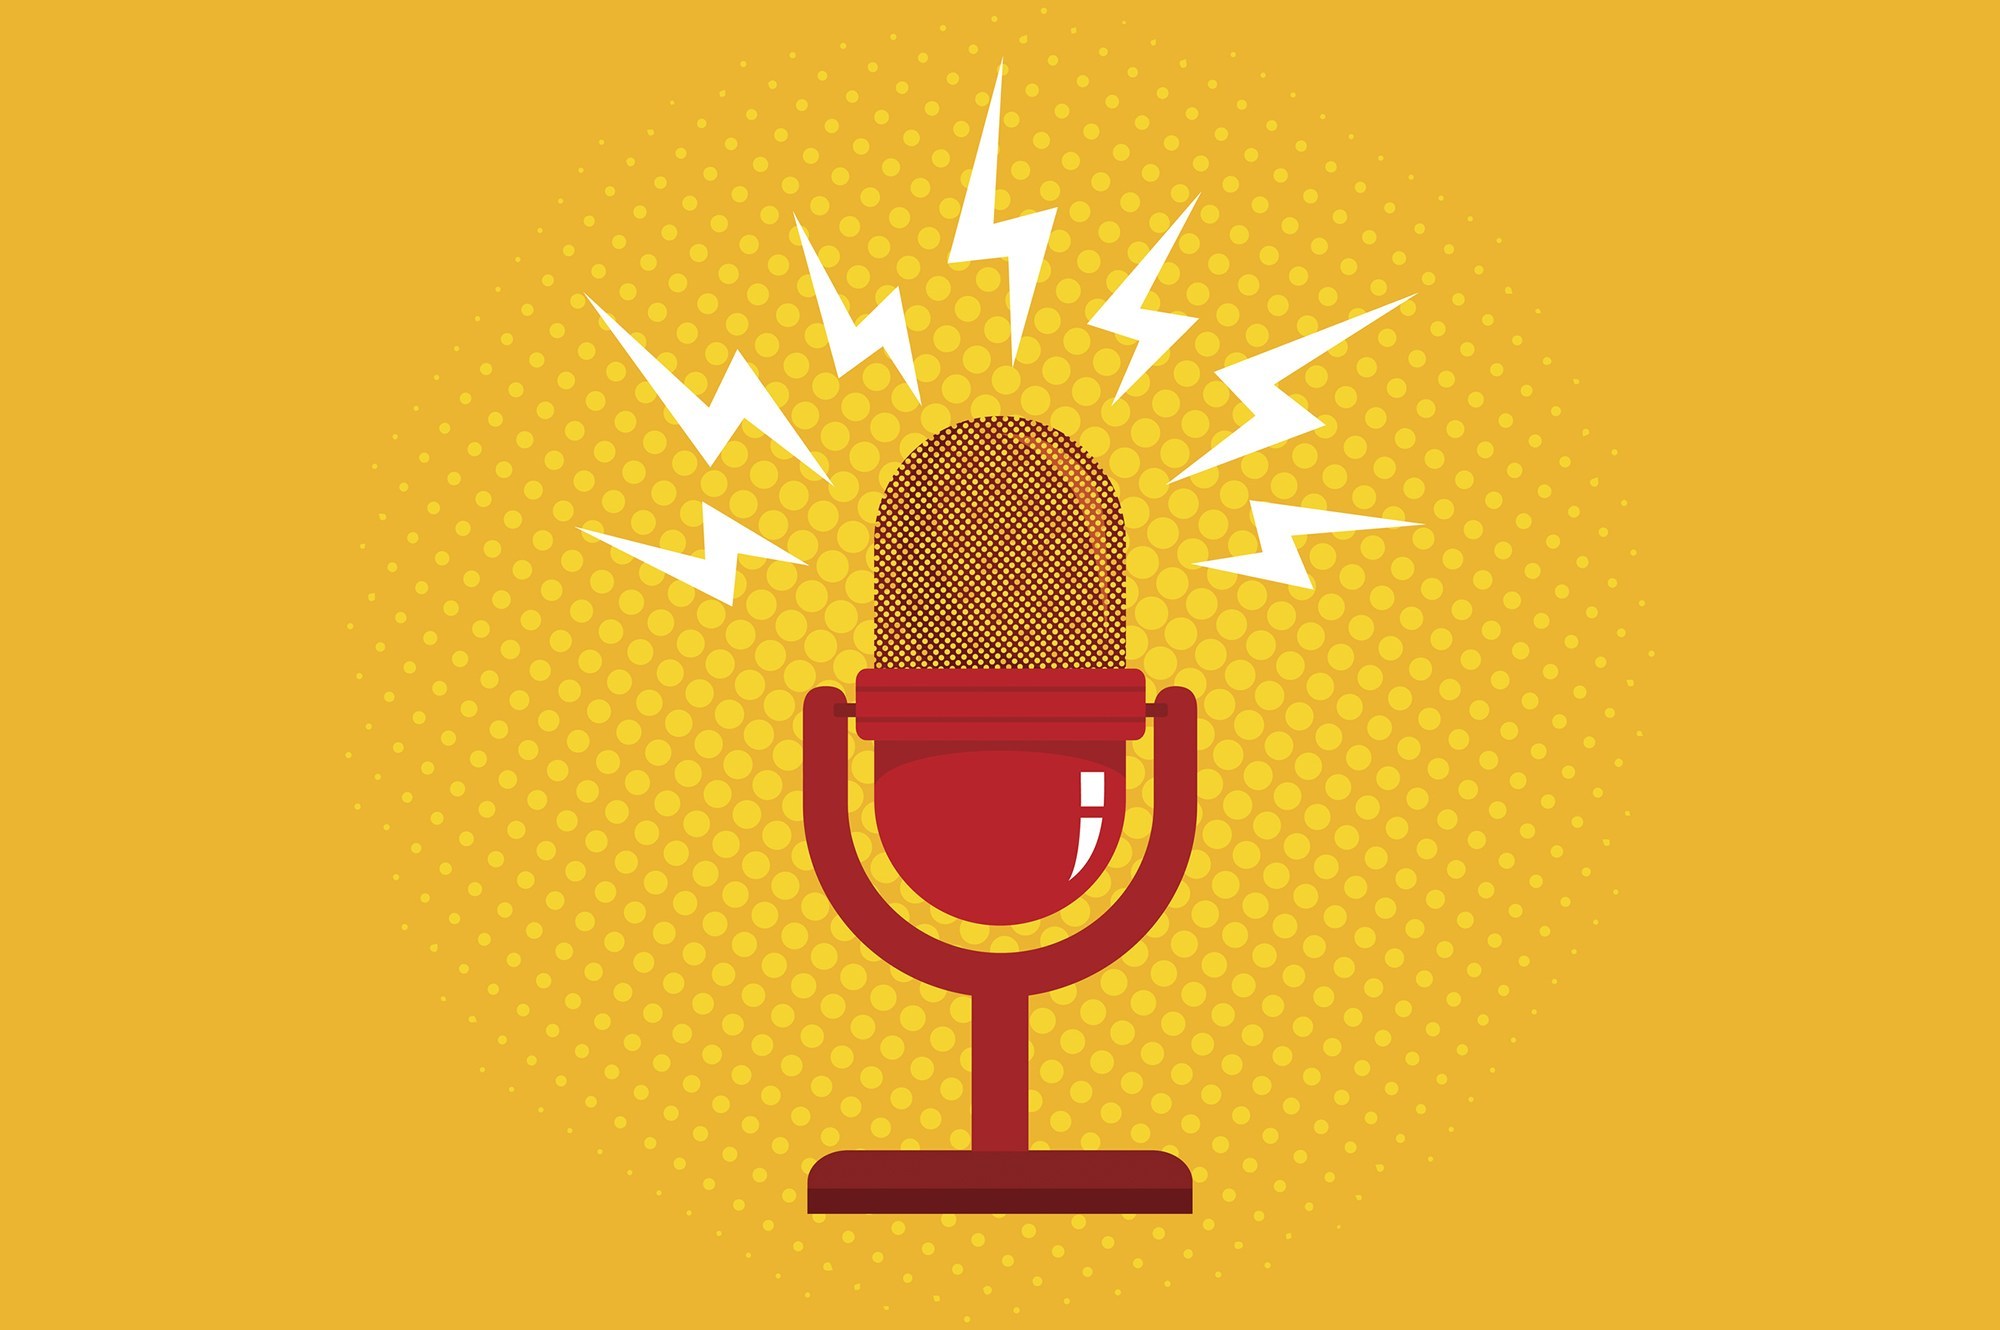 Illustration of a retro-style red microphone on a yellow background with a dotted pattern. White lightning bolts surround the top of the microphone, suggesting sound or broadcasting, reminiscent of Berkeley Journalism's classic aesthetic.